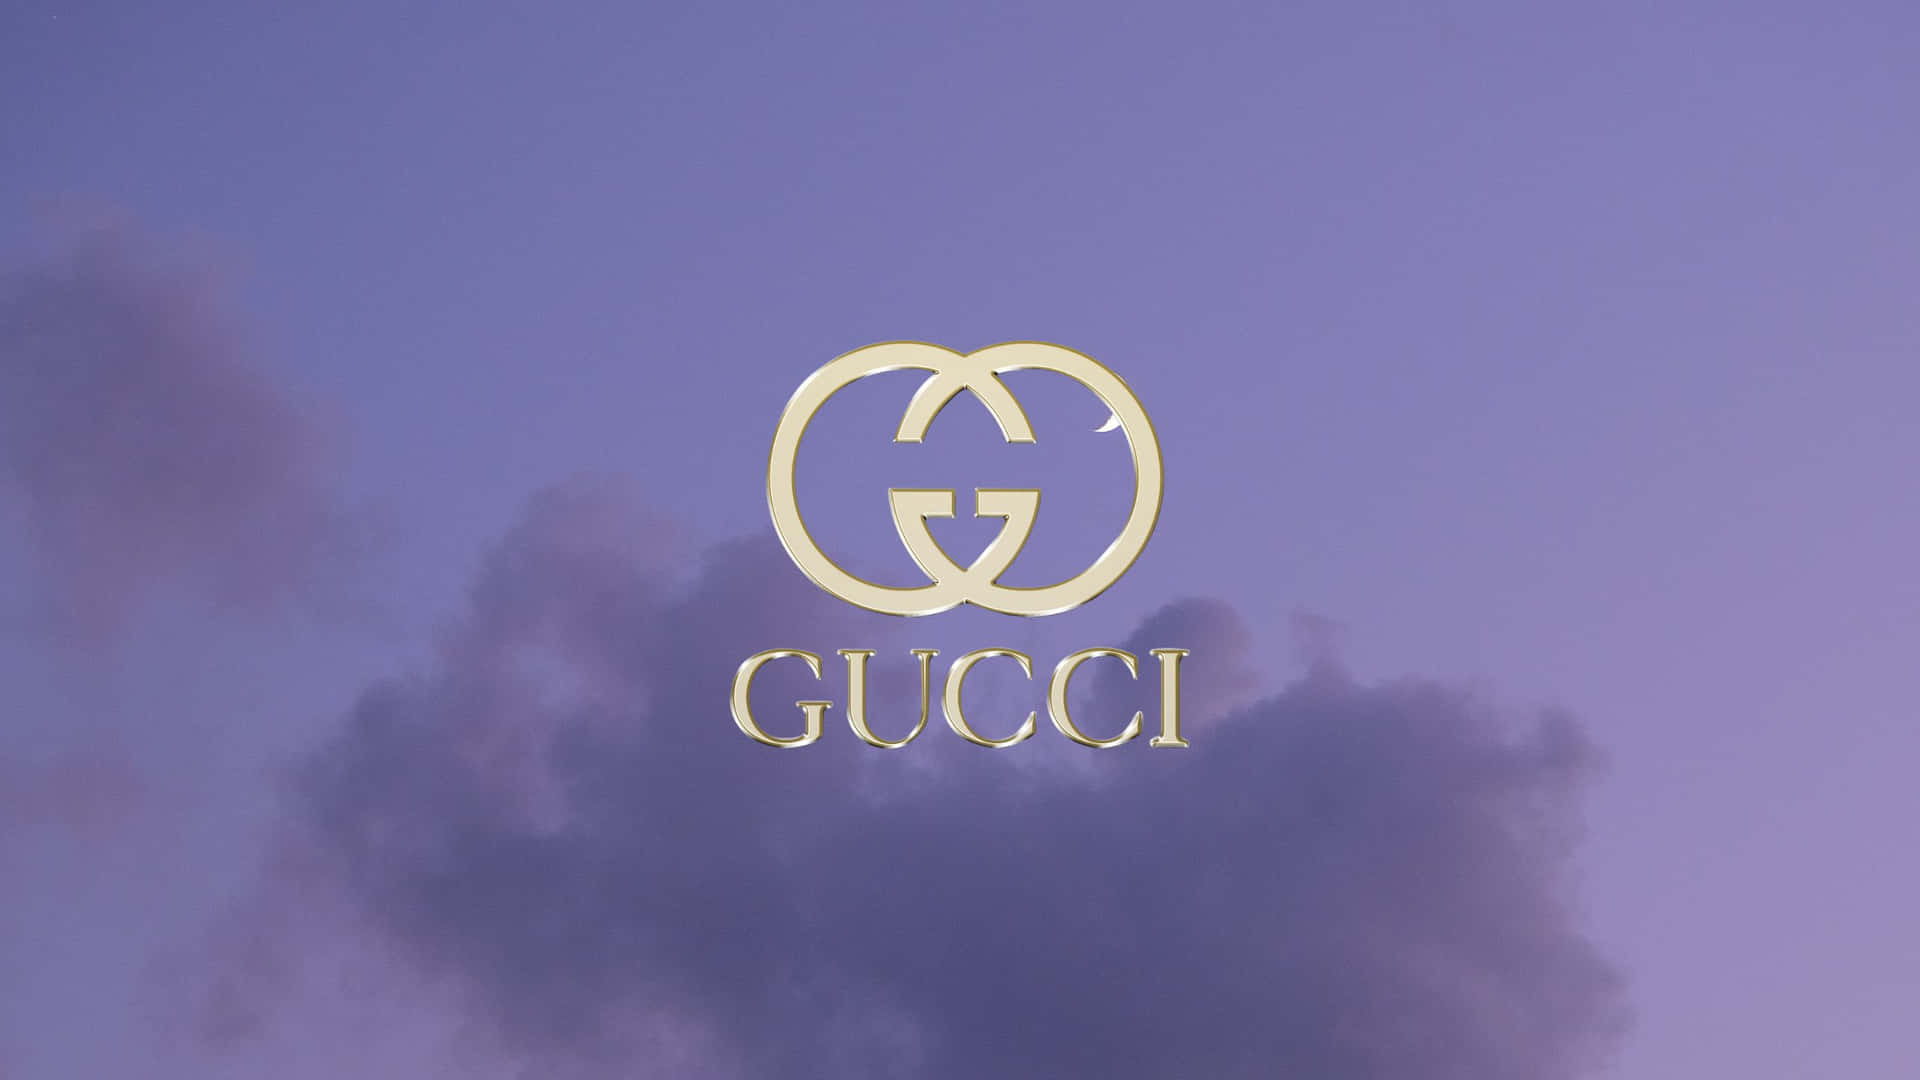 Step up your shoe game with the latest purple Gucci kicks Wallpaper